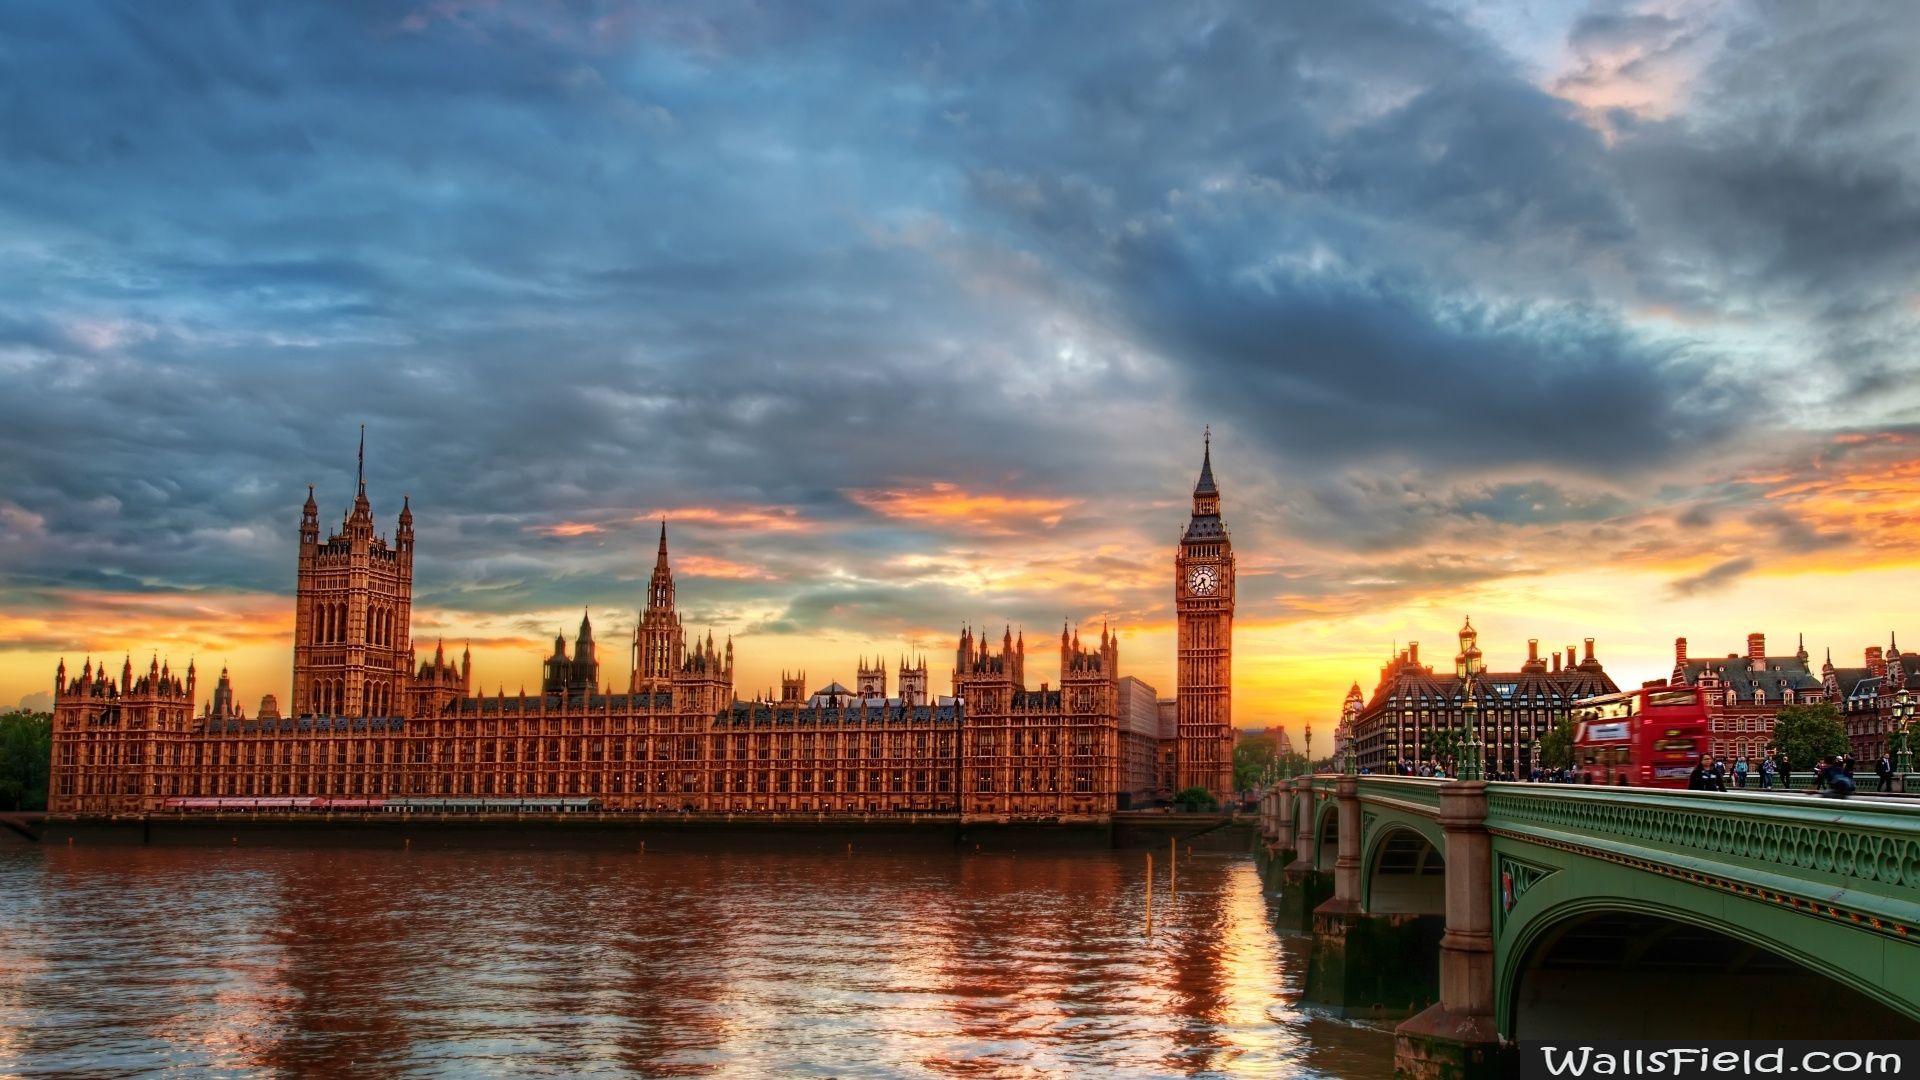 Westminster Palace At Twilight.com. Free HD Wallpaper. London wallpaper, London travel, London england